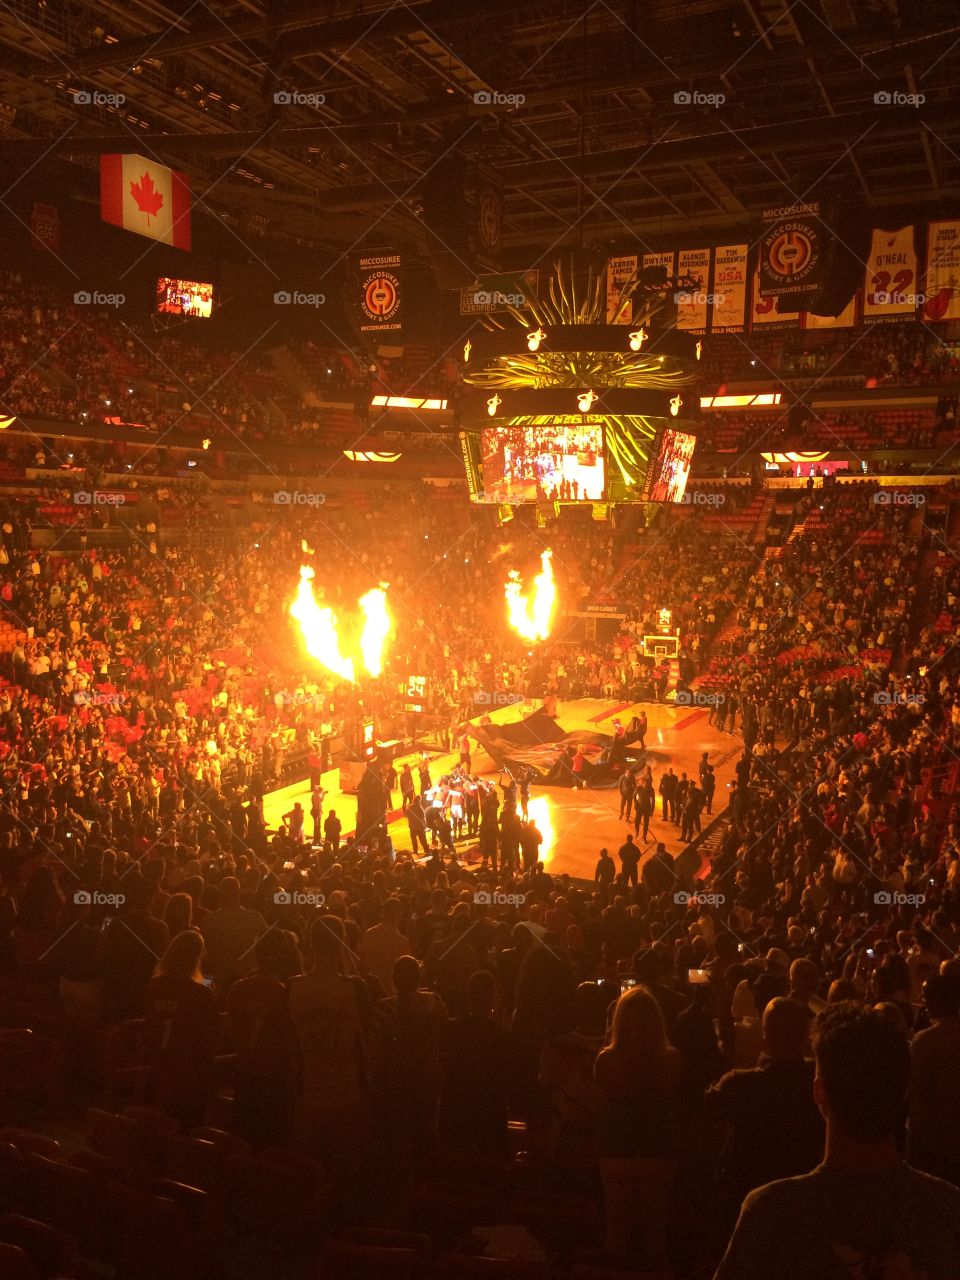 Miami Heat basketball game at the AAA